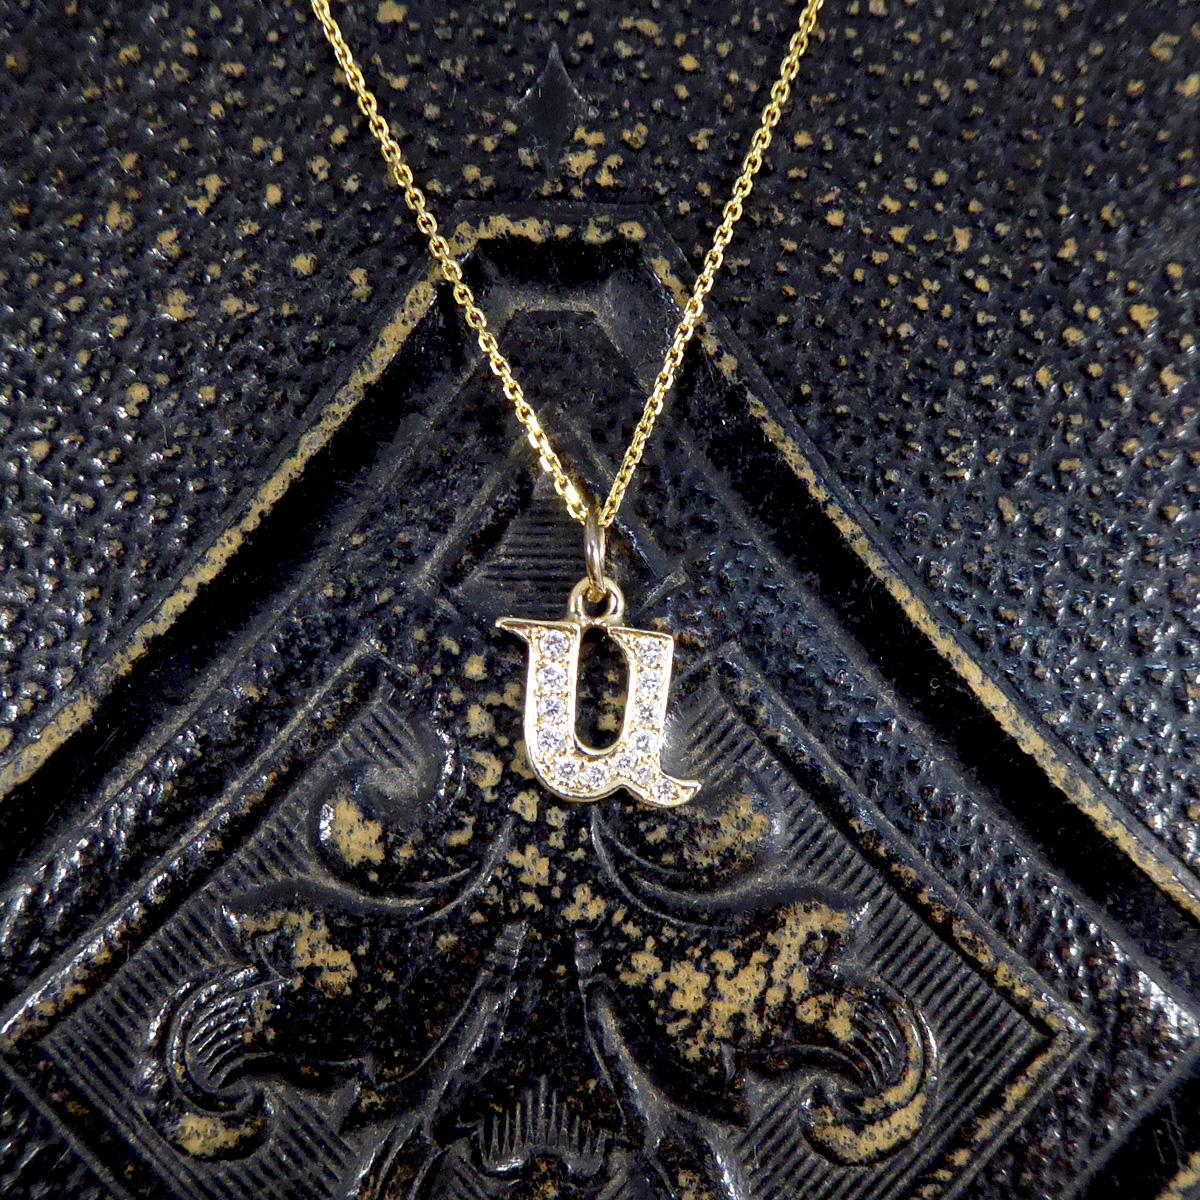 The perfect gift of a Gold Diamond set initial necklace. So elegant and dainty the initial 